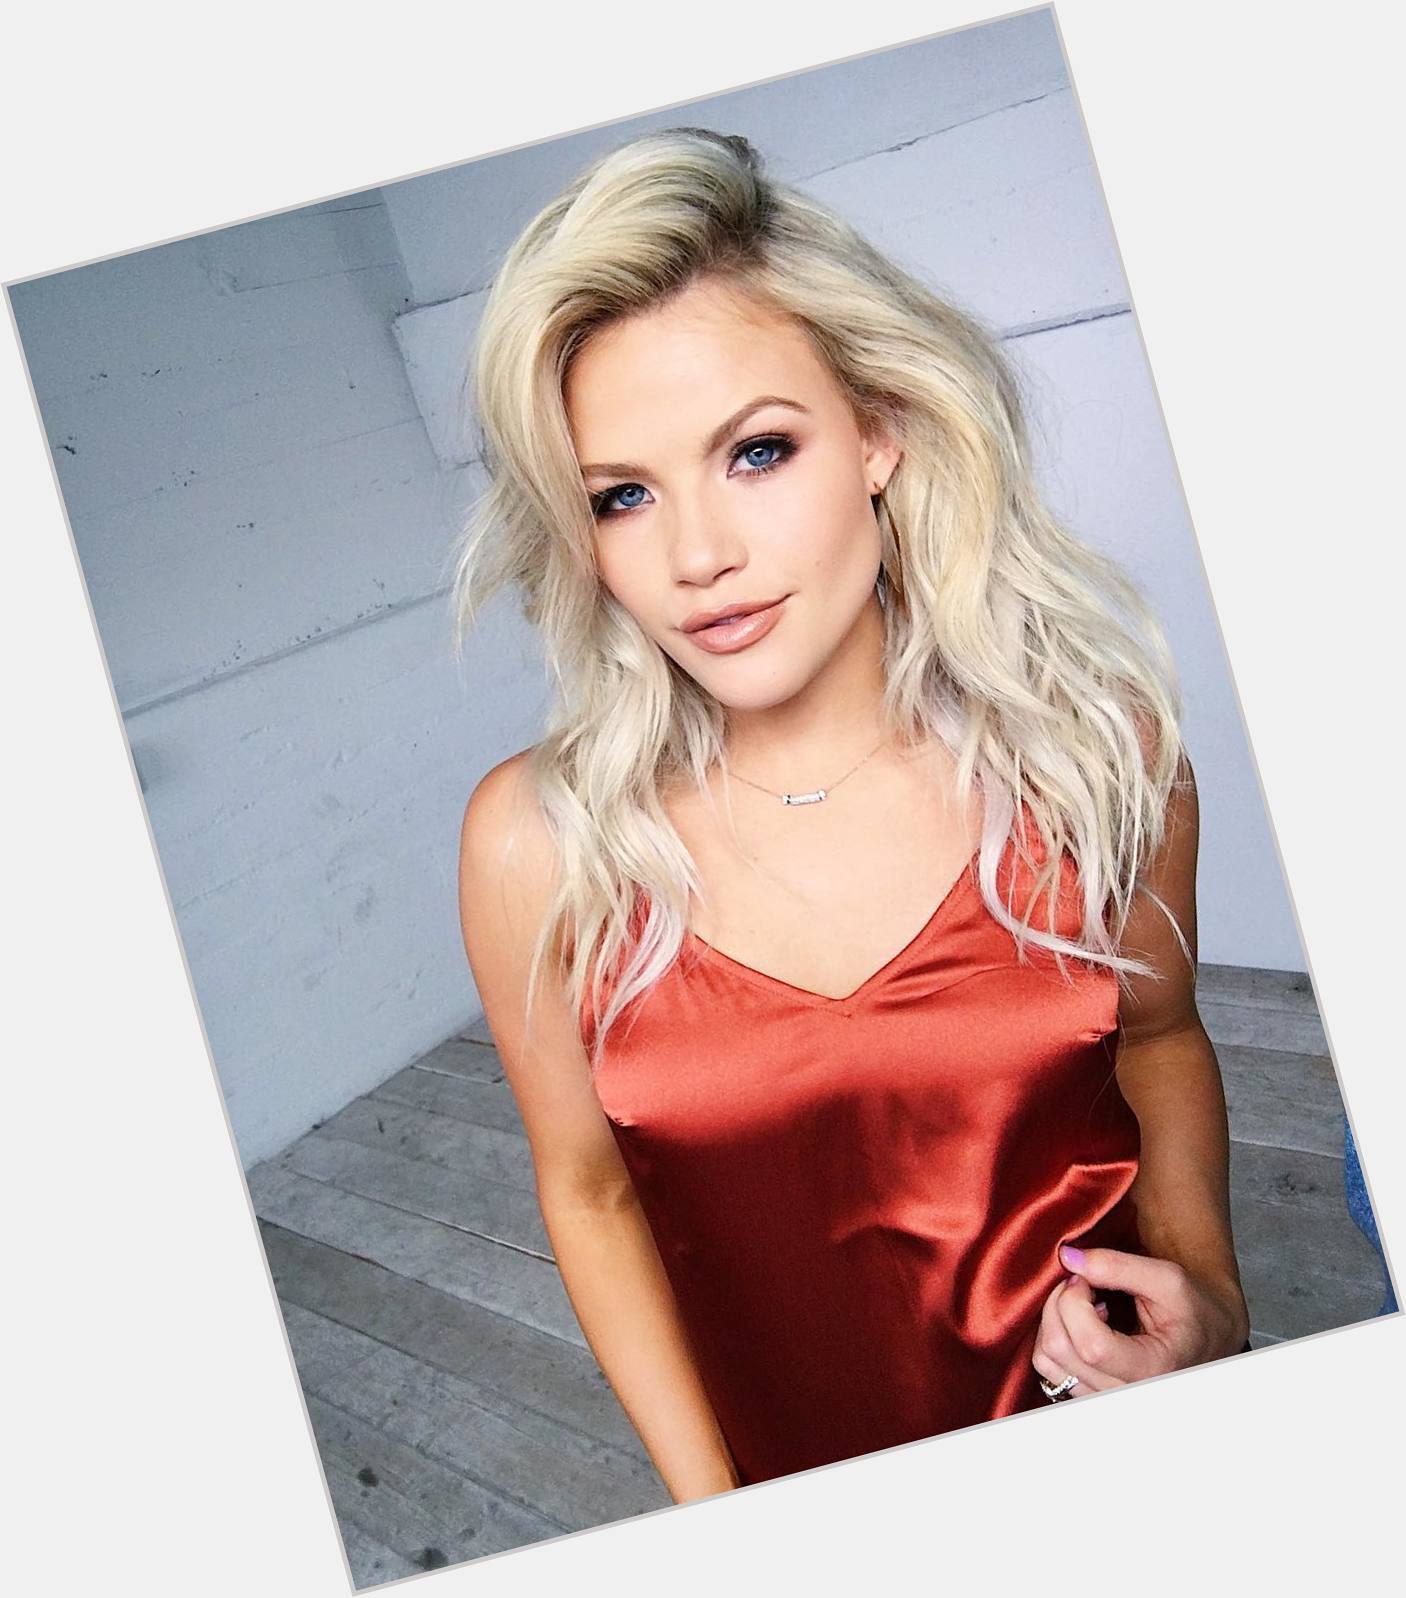 <a href="/hot-women/witney-carson/where-dating-news-photos">Witney Carson</a>  